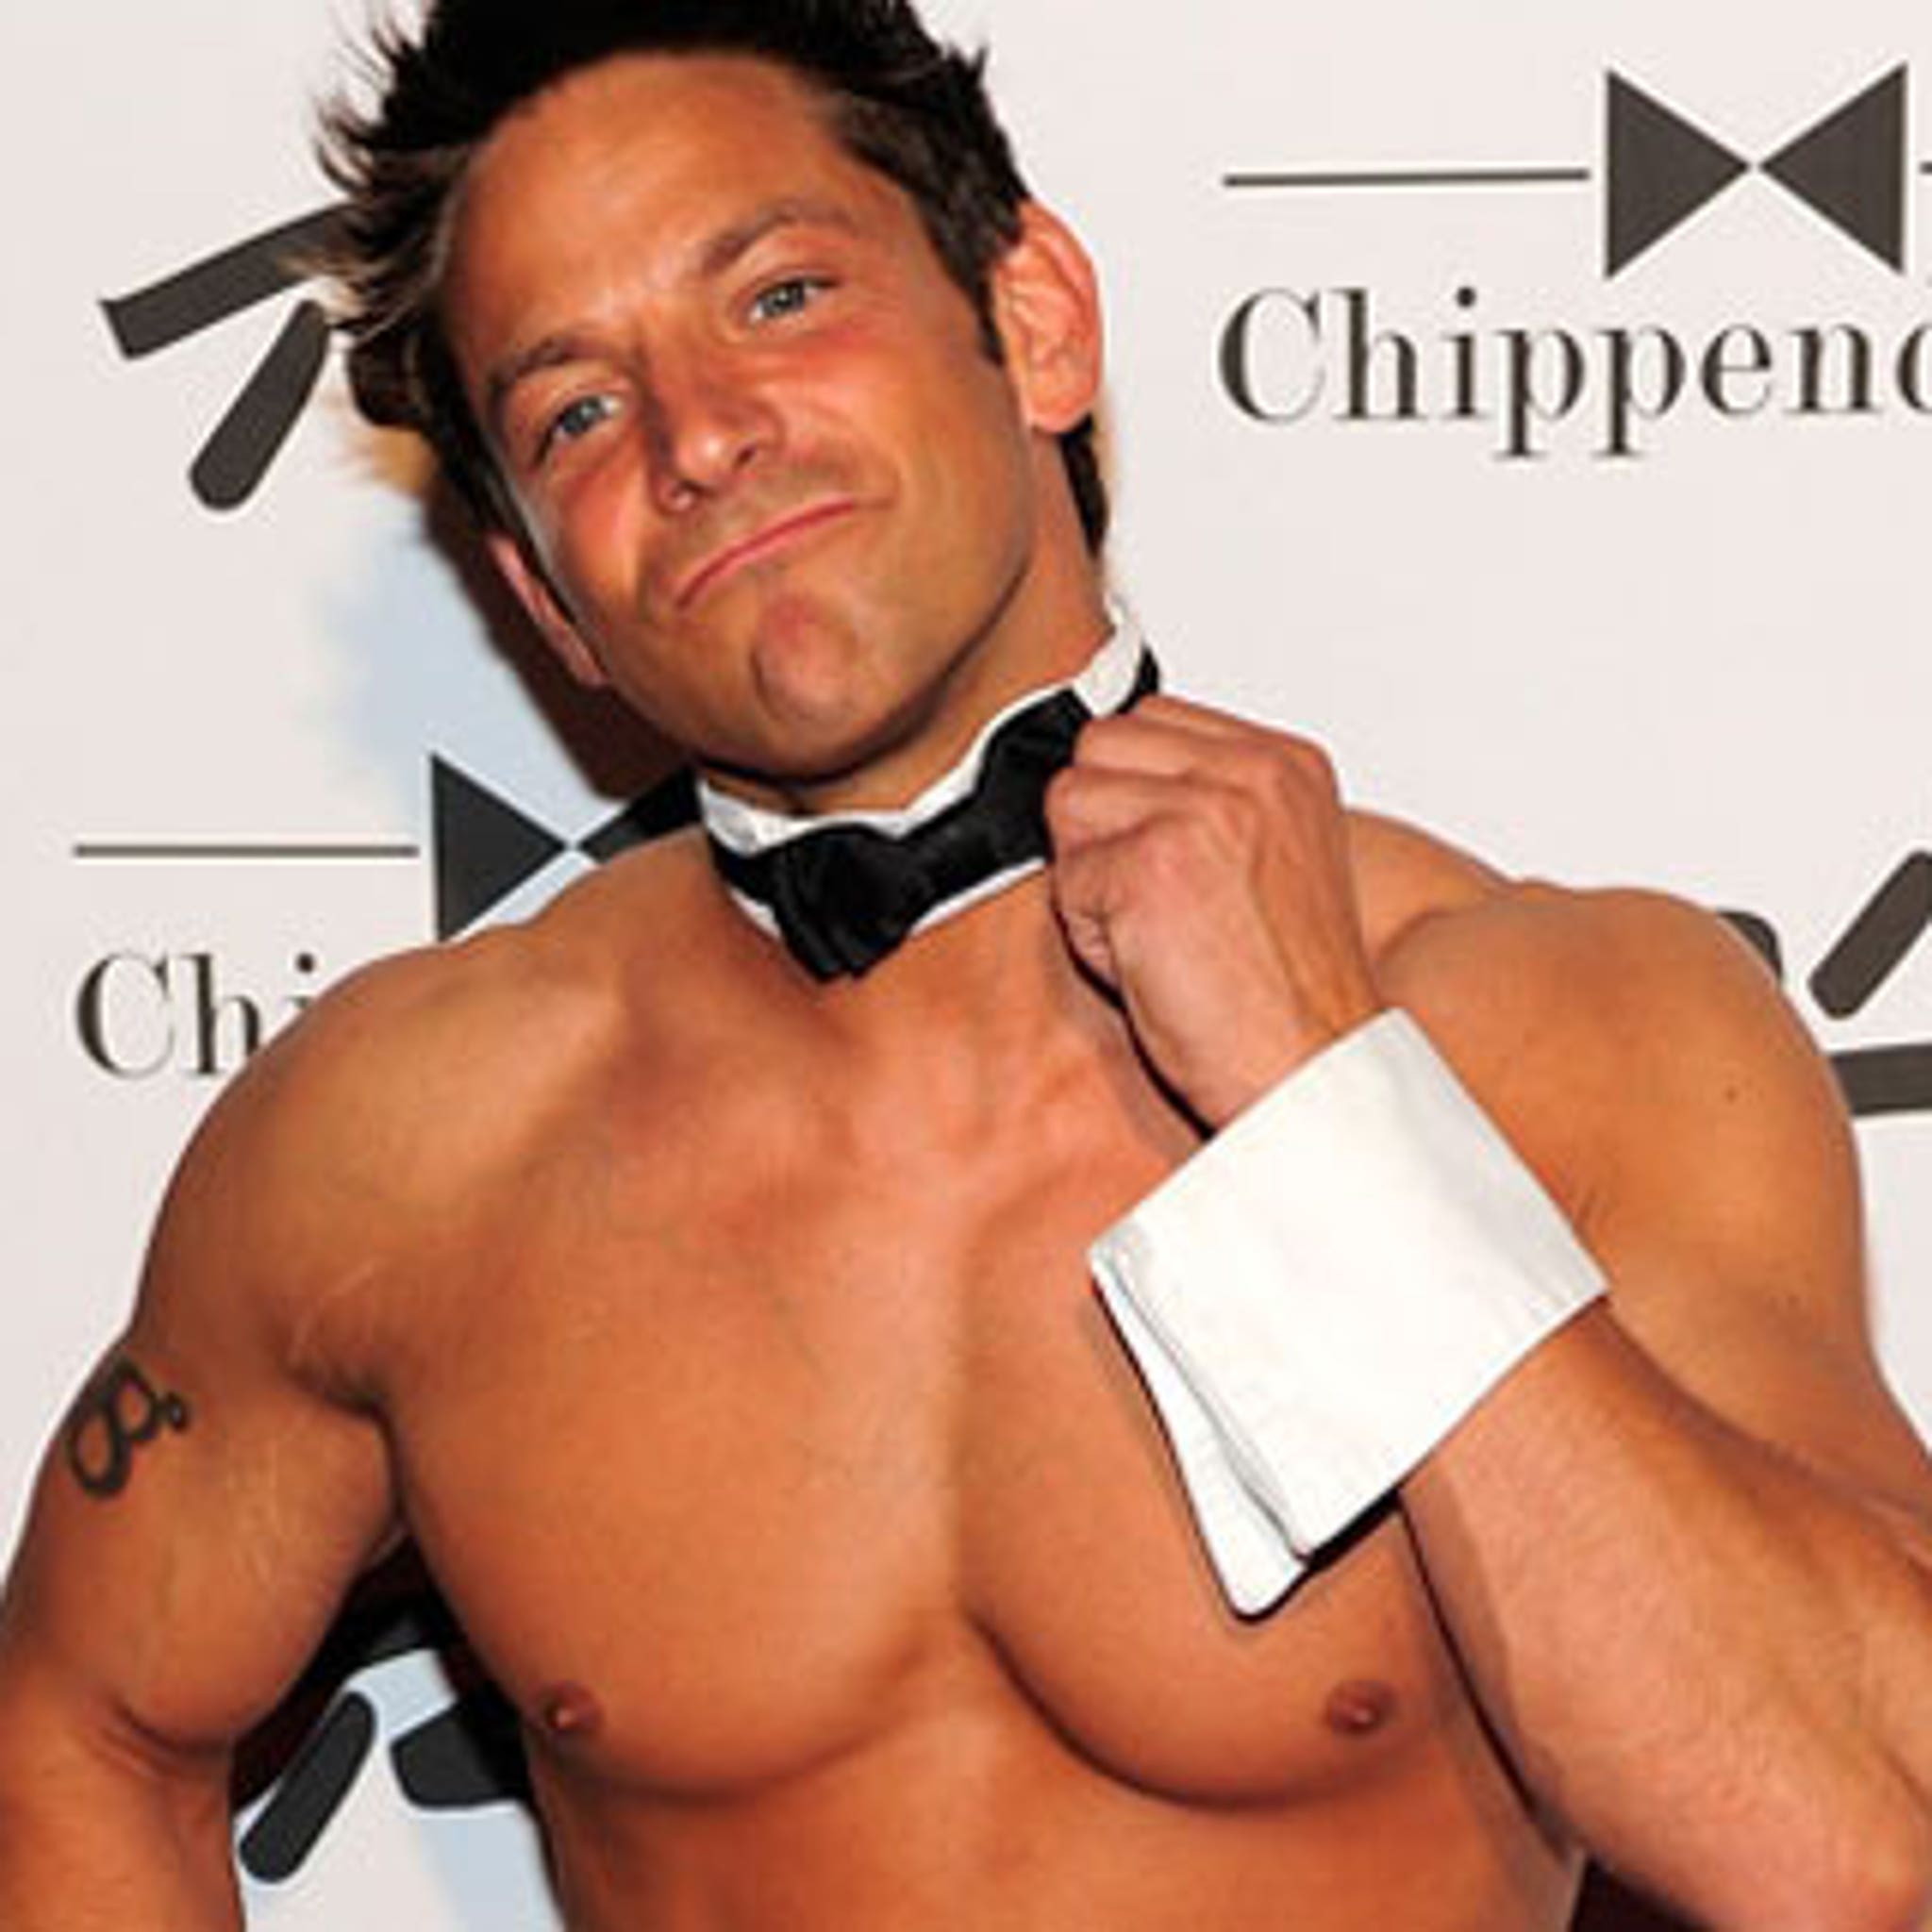 98 degrees chippendales